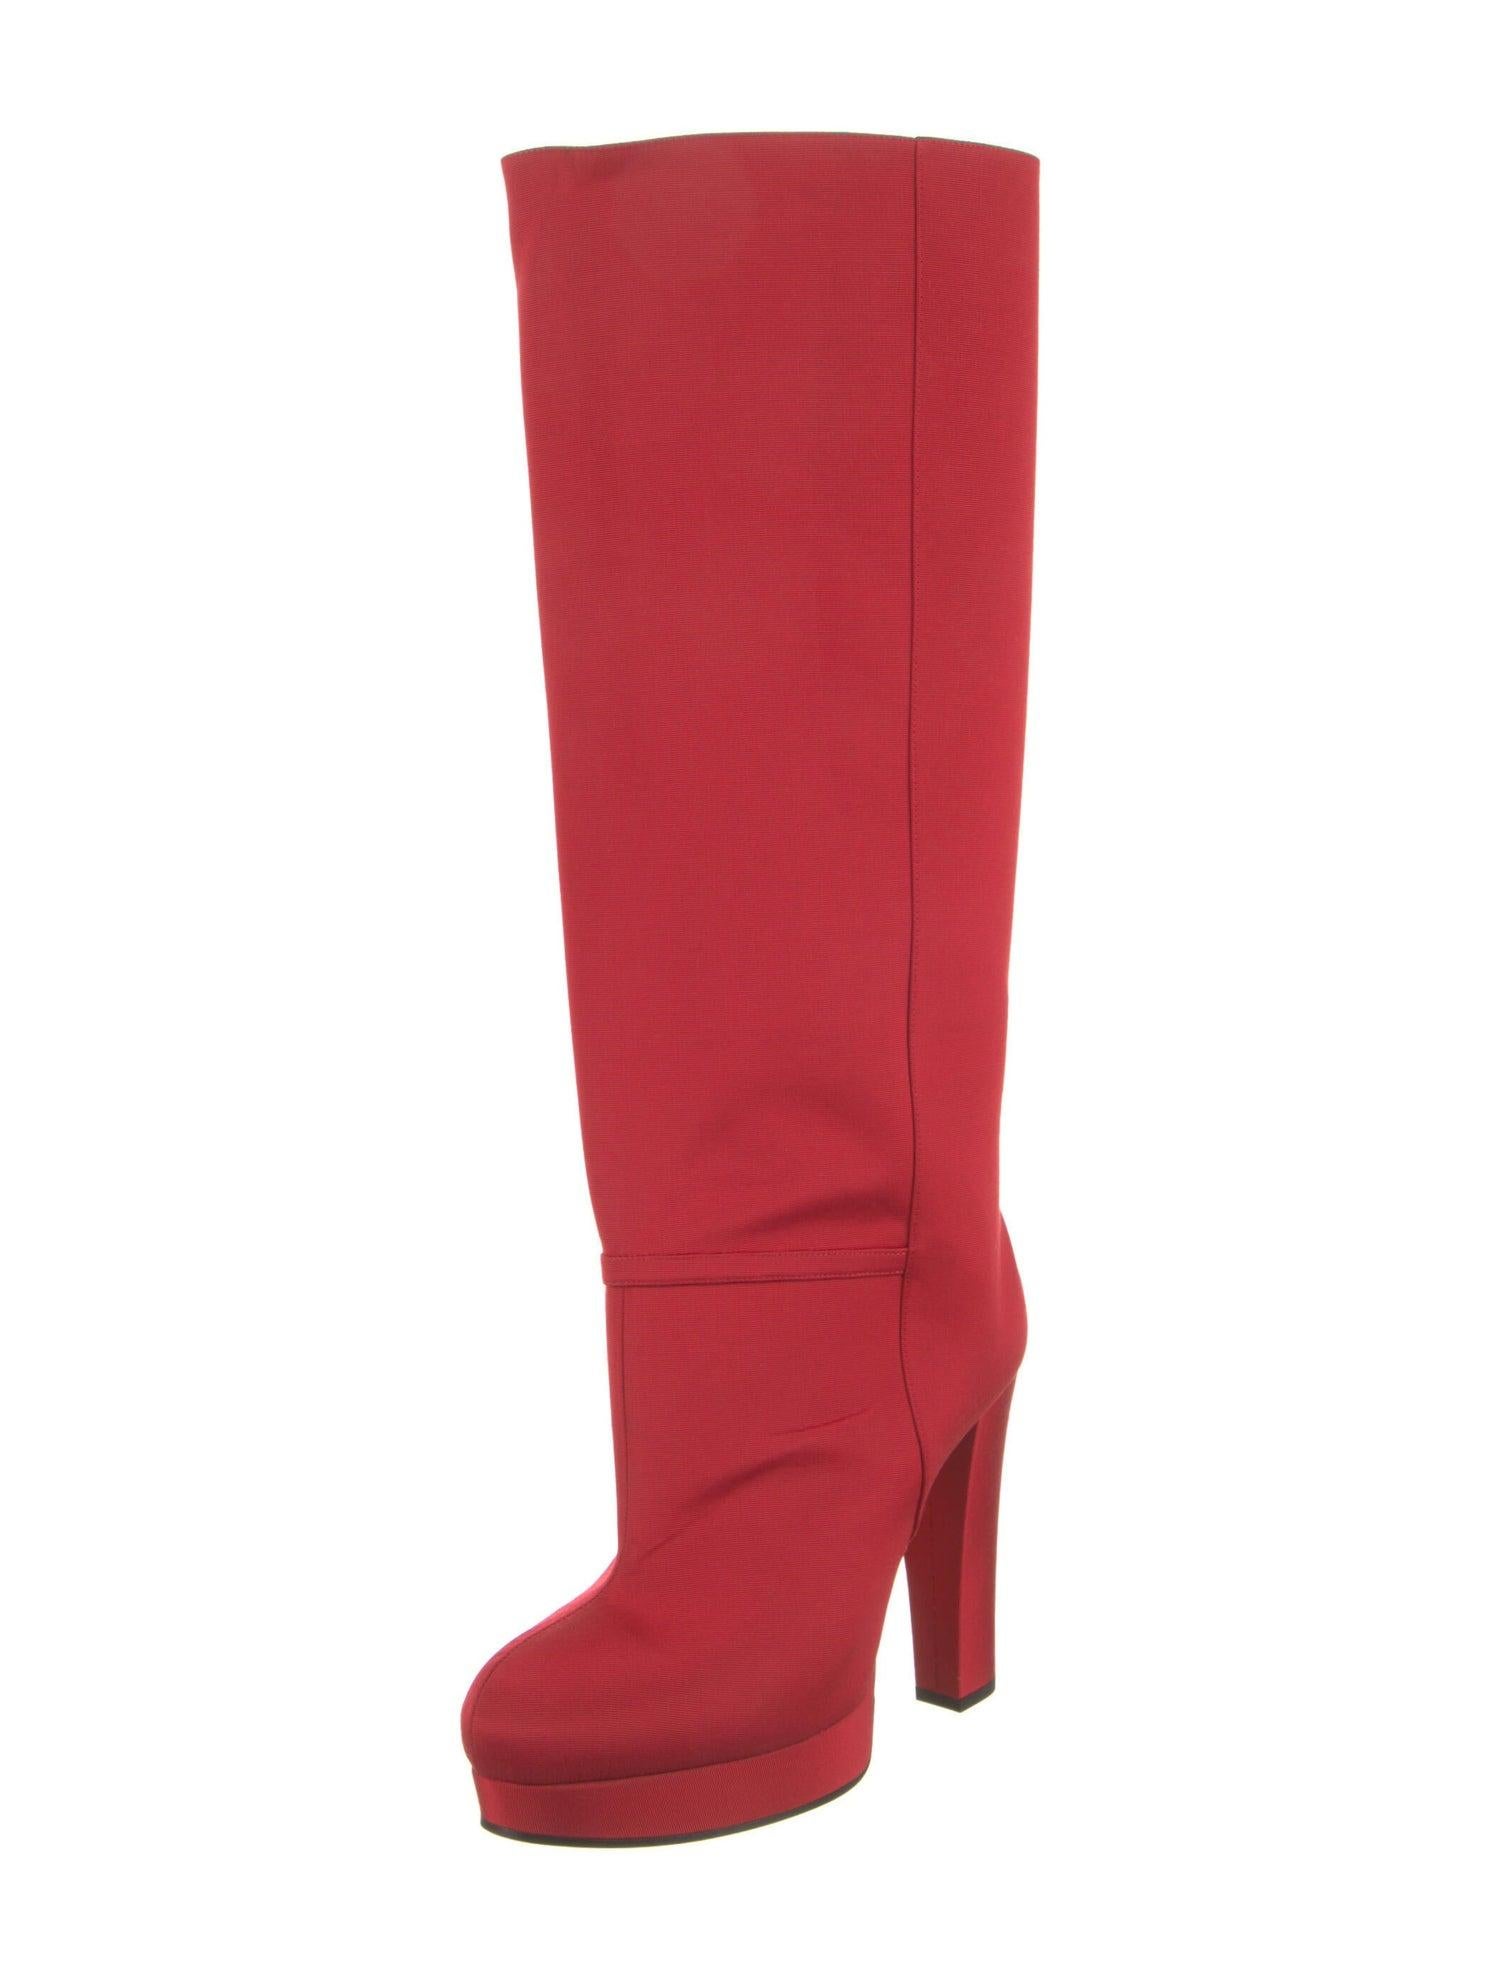 New With Box Gucci Fall 2019 Alessandro Michele Red Boots Sz 36.5 12